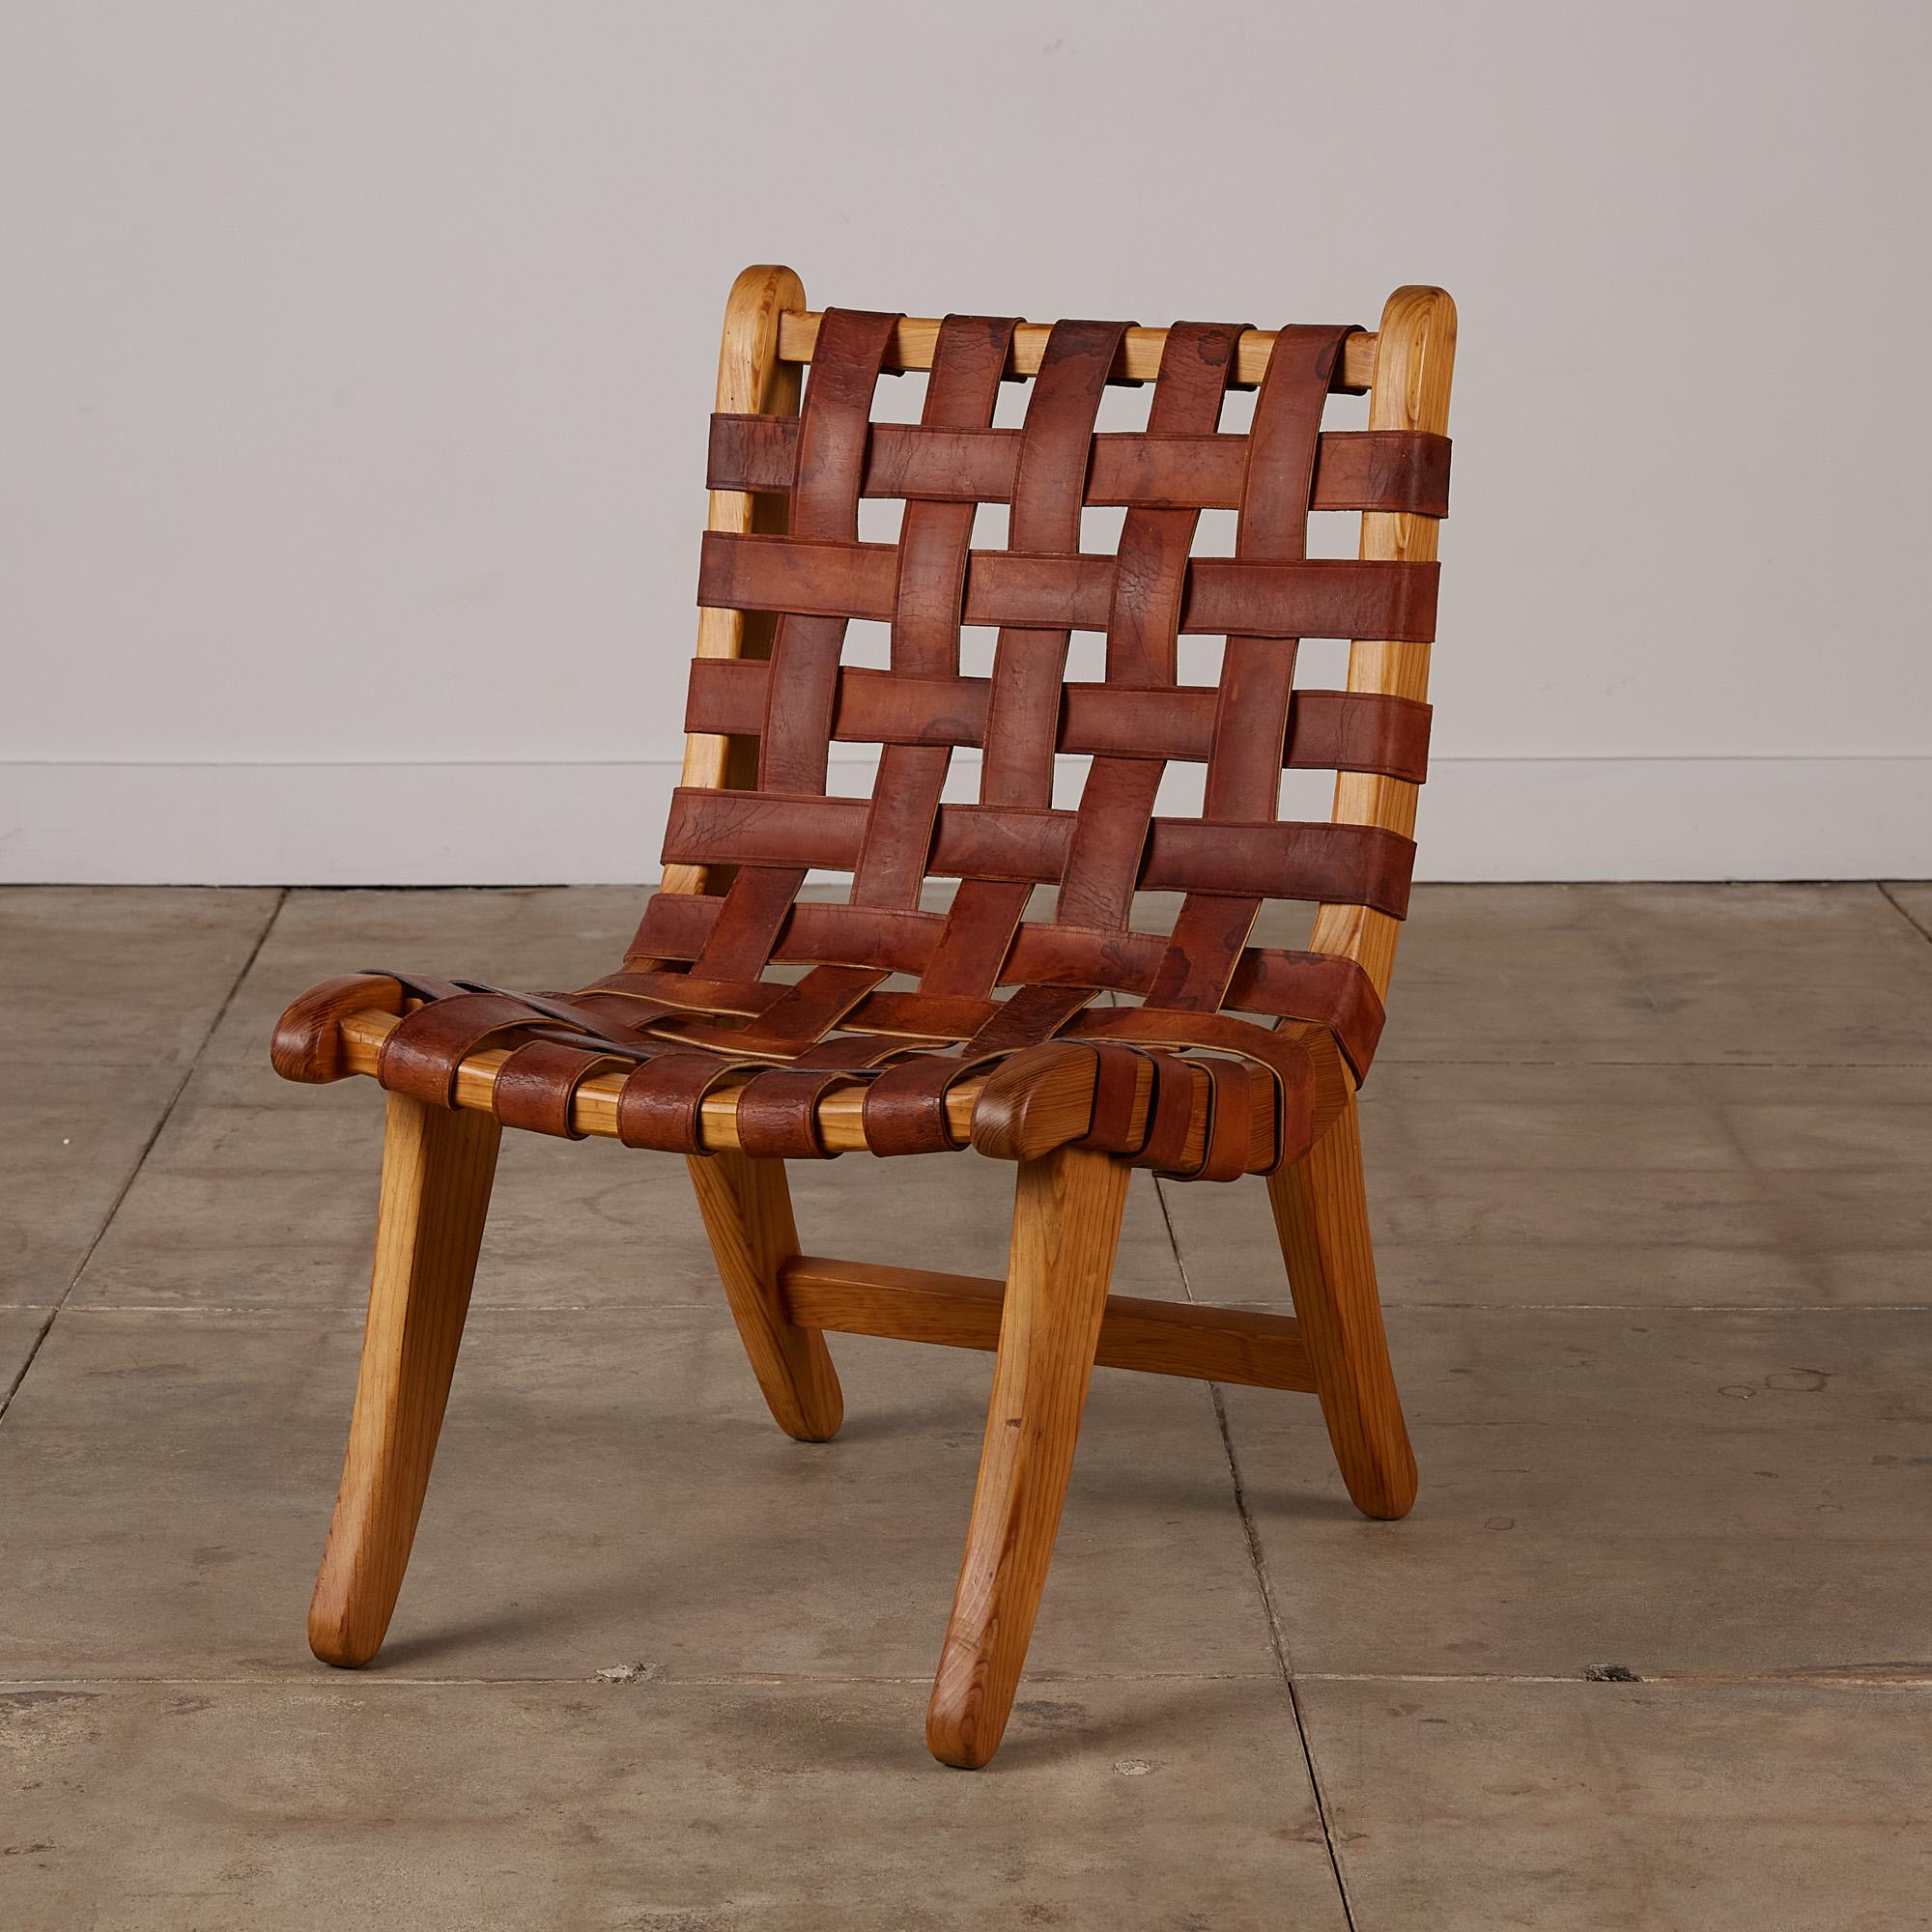 San Miguelito chair by Michael van Beuren for Domus, circa 1940s. The San Miguelito or Miguel chair was named after van Beuren’s Spanish moniker, “Don Miguel.” The chair is van Beuren’s interpretation of the traditional butaca, or butaque chair,